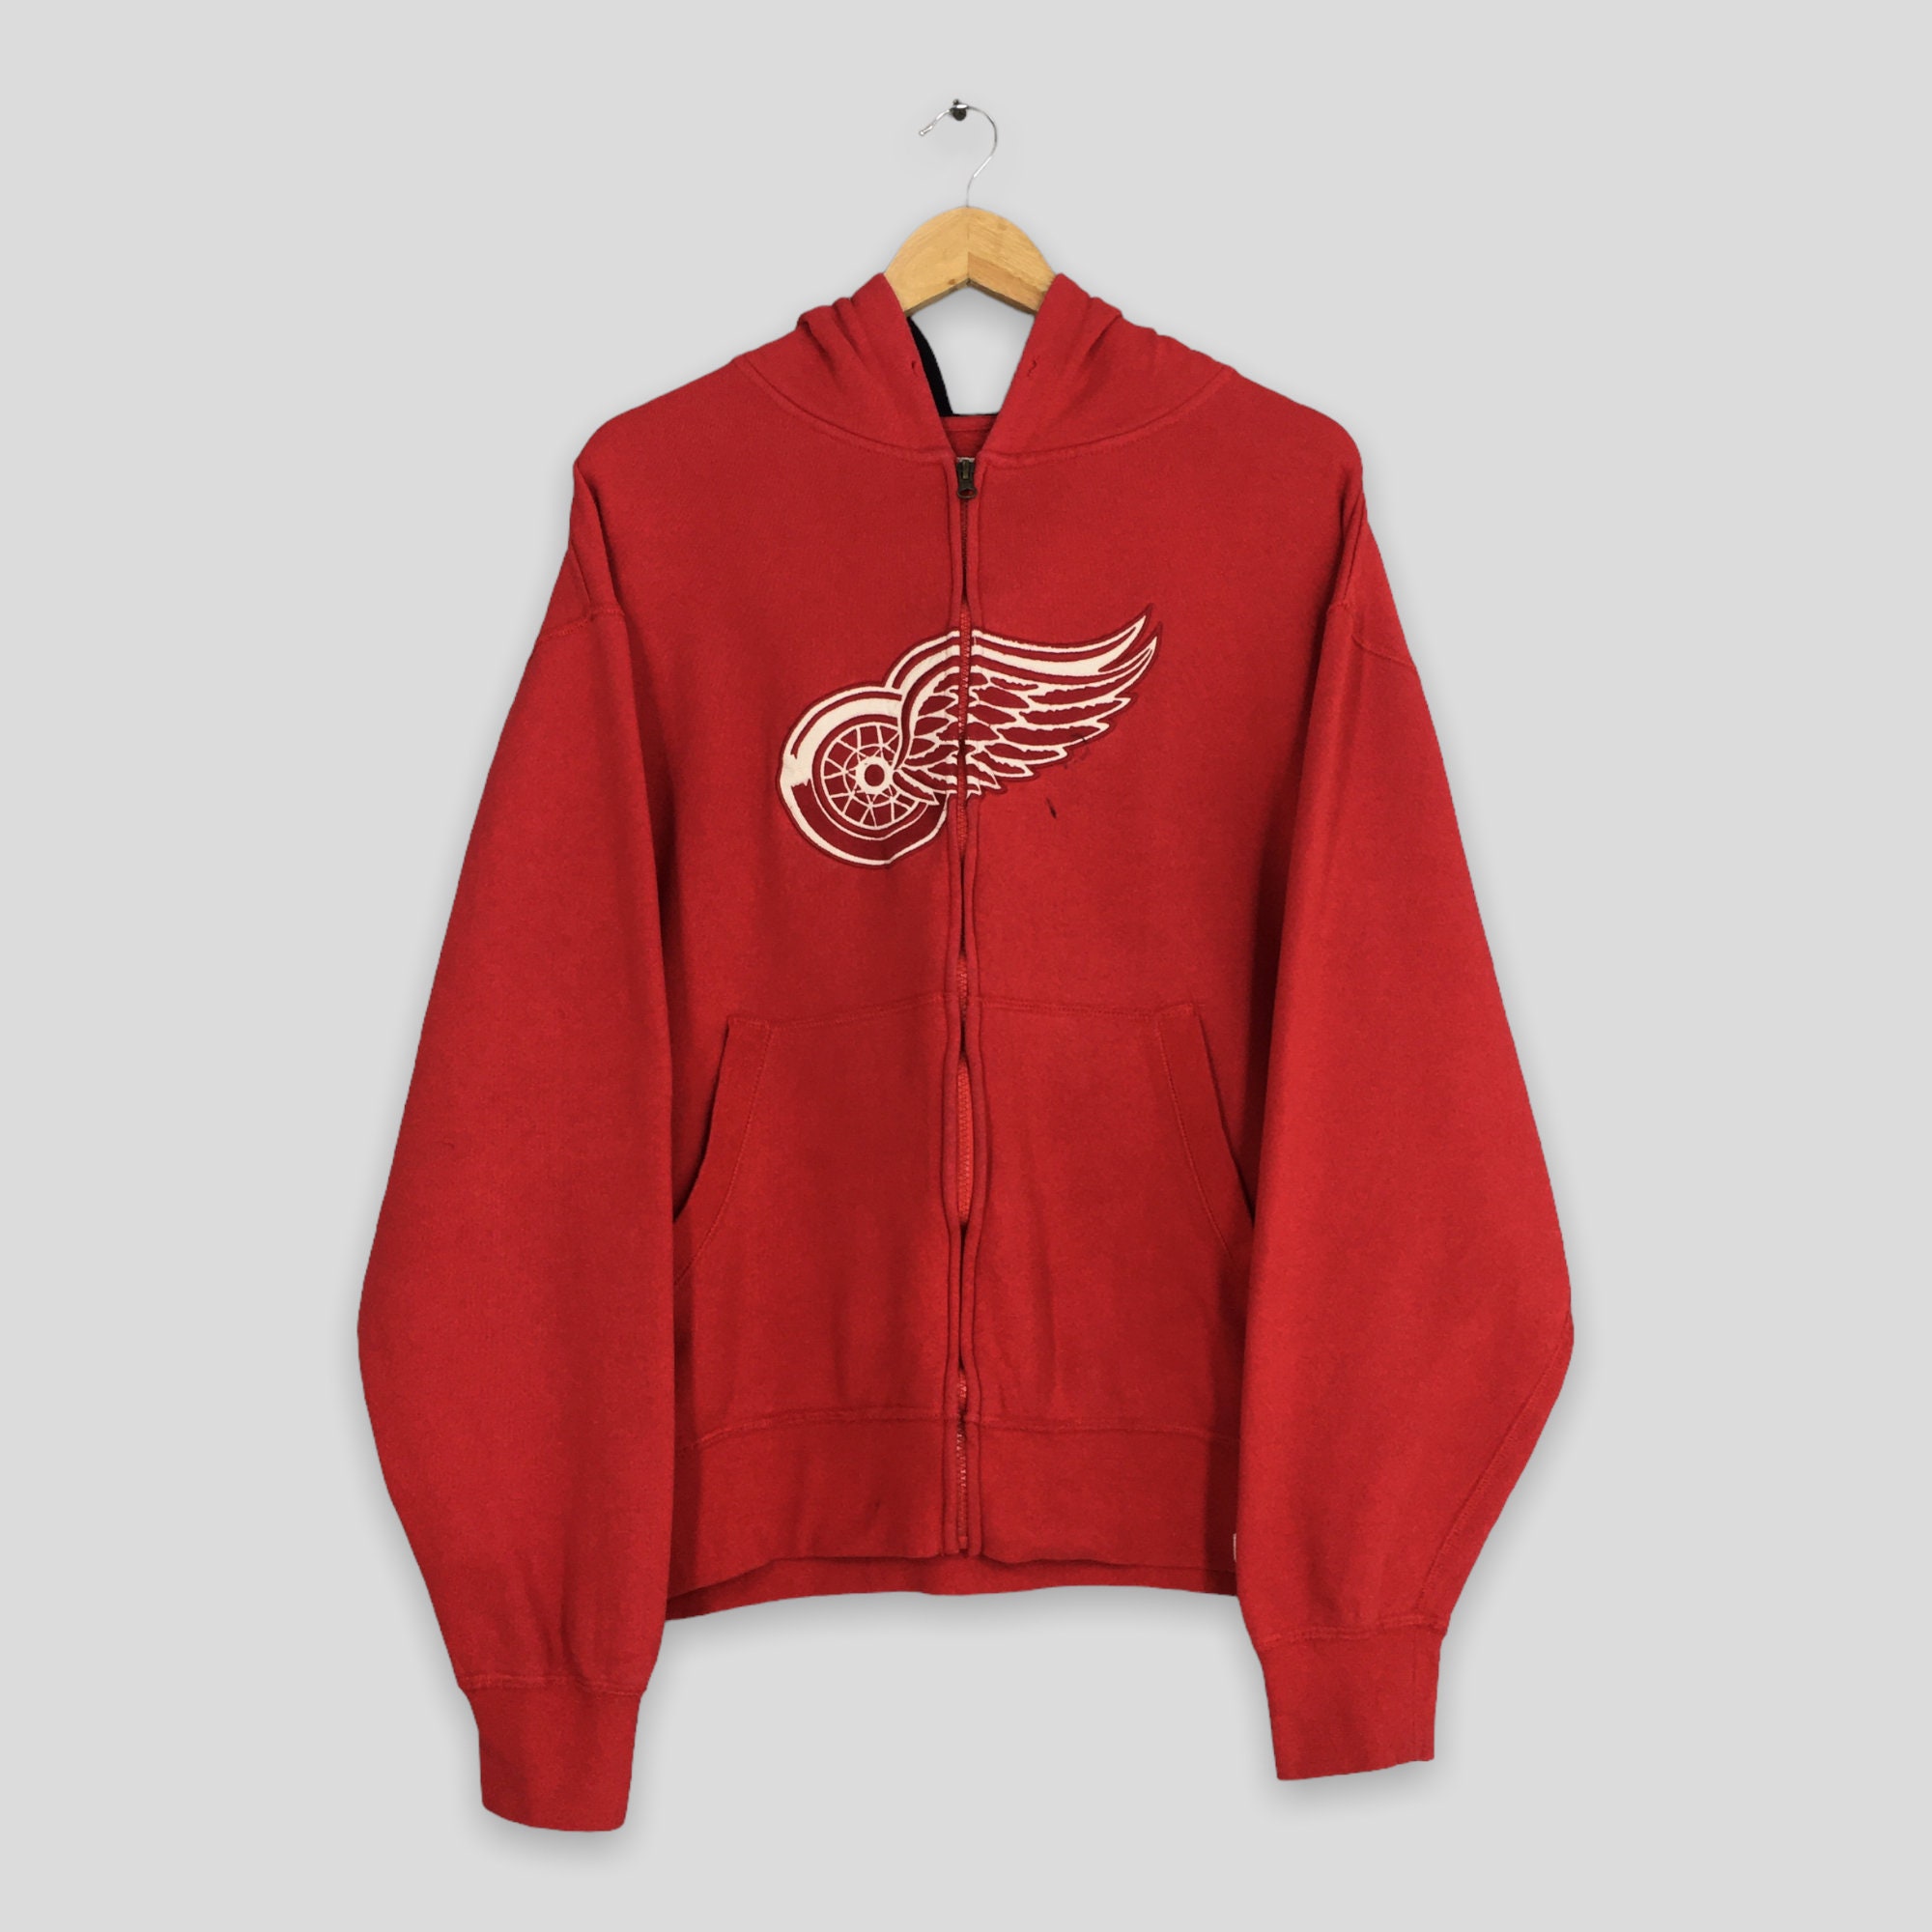 Factory Price Mens Detroit Red Wings Jerseys #91 Sergei Fedorov CCM Vintage  Ice Hockey Jersey,100% Embroidery and Sewing Logos - AliExpress